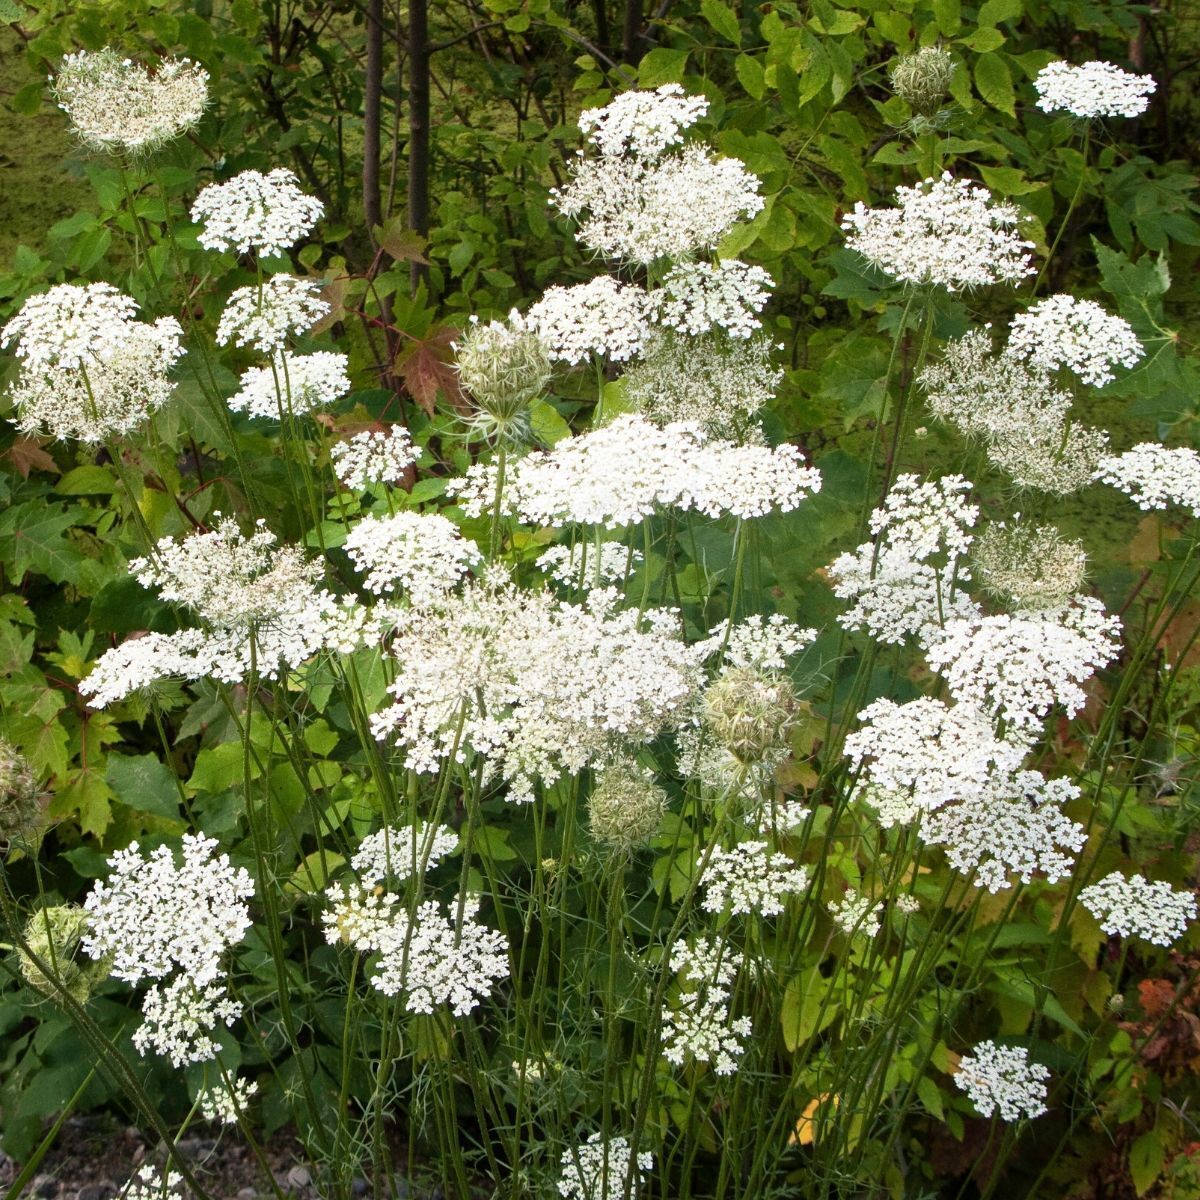 Featured Plant: Queen Anne's Lace